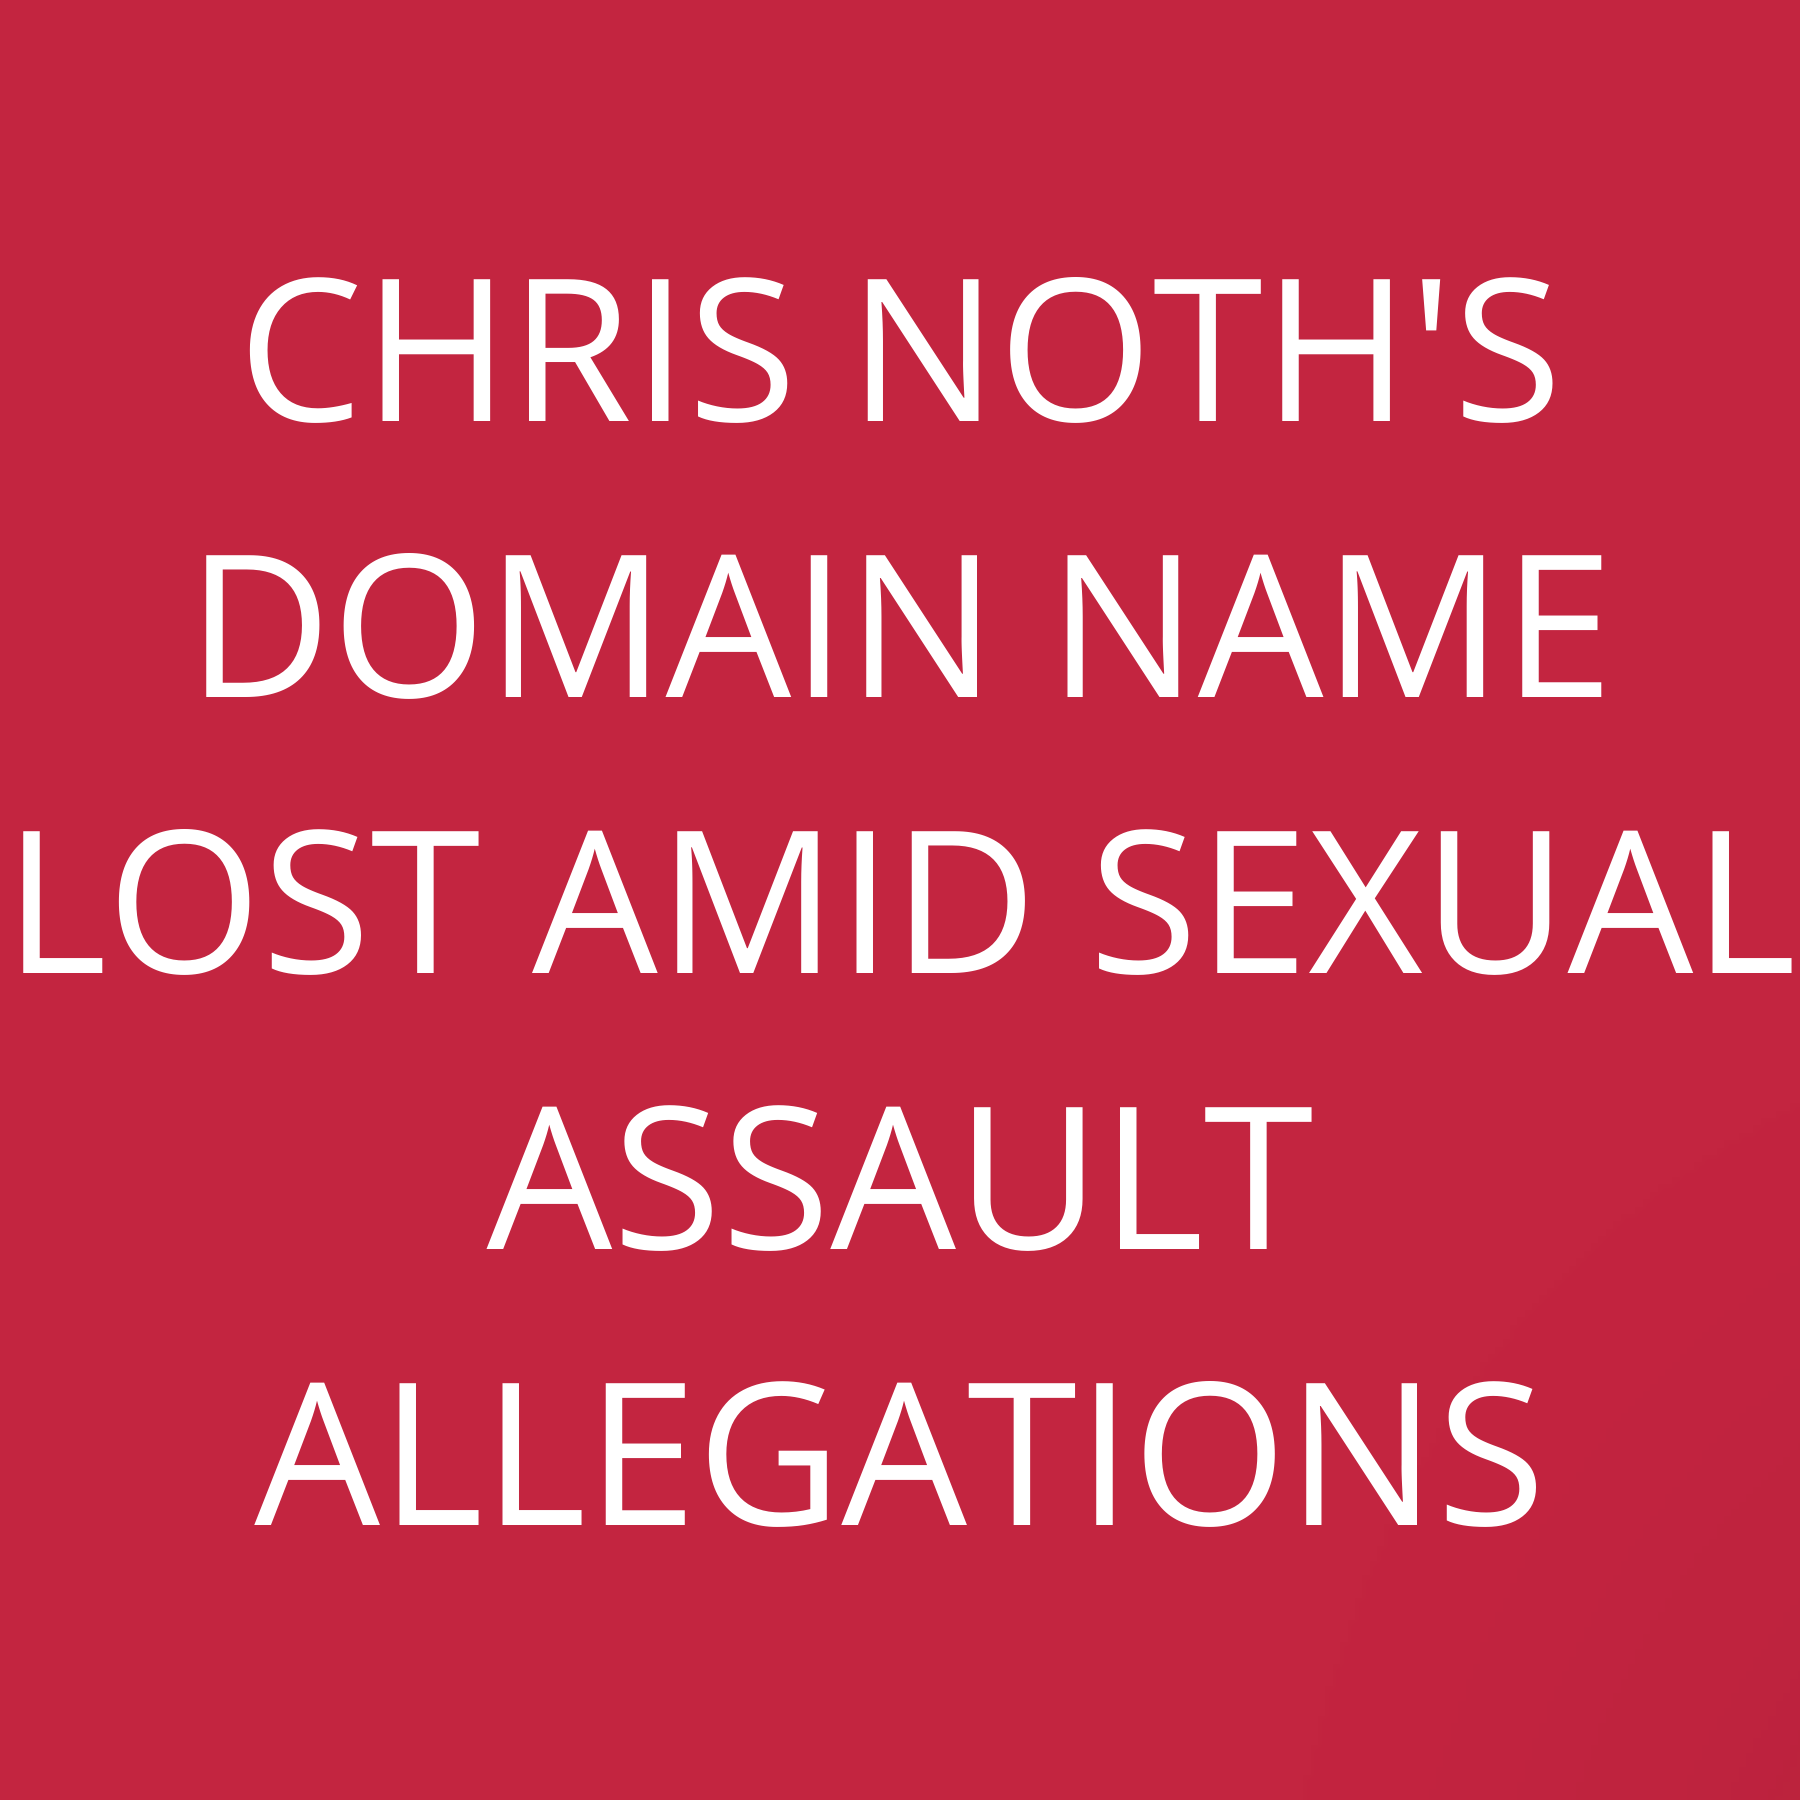 Chris Noth’s domain name lost amid sexual assault allegations